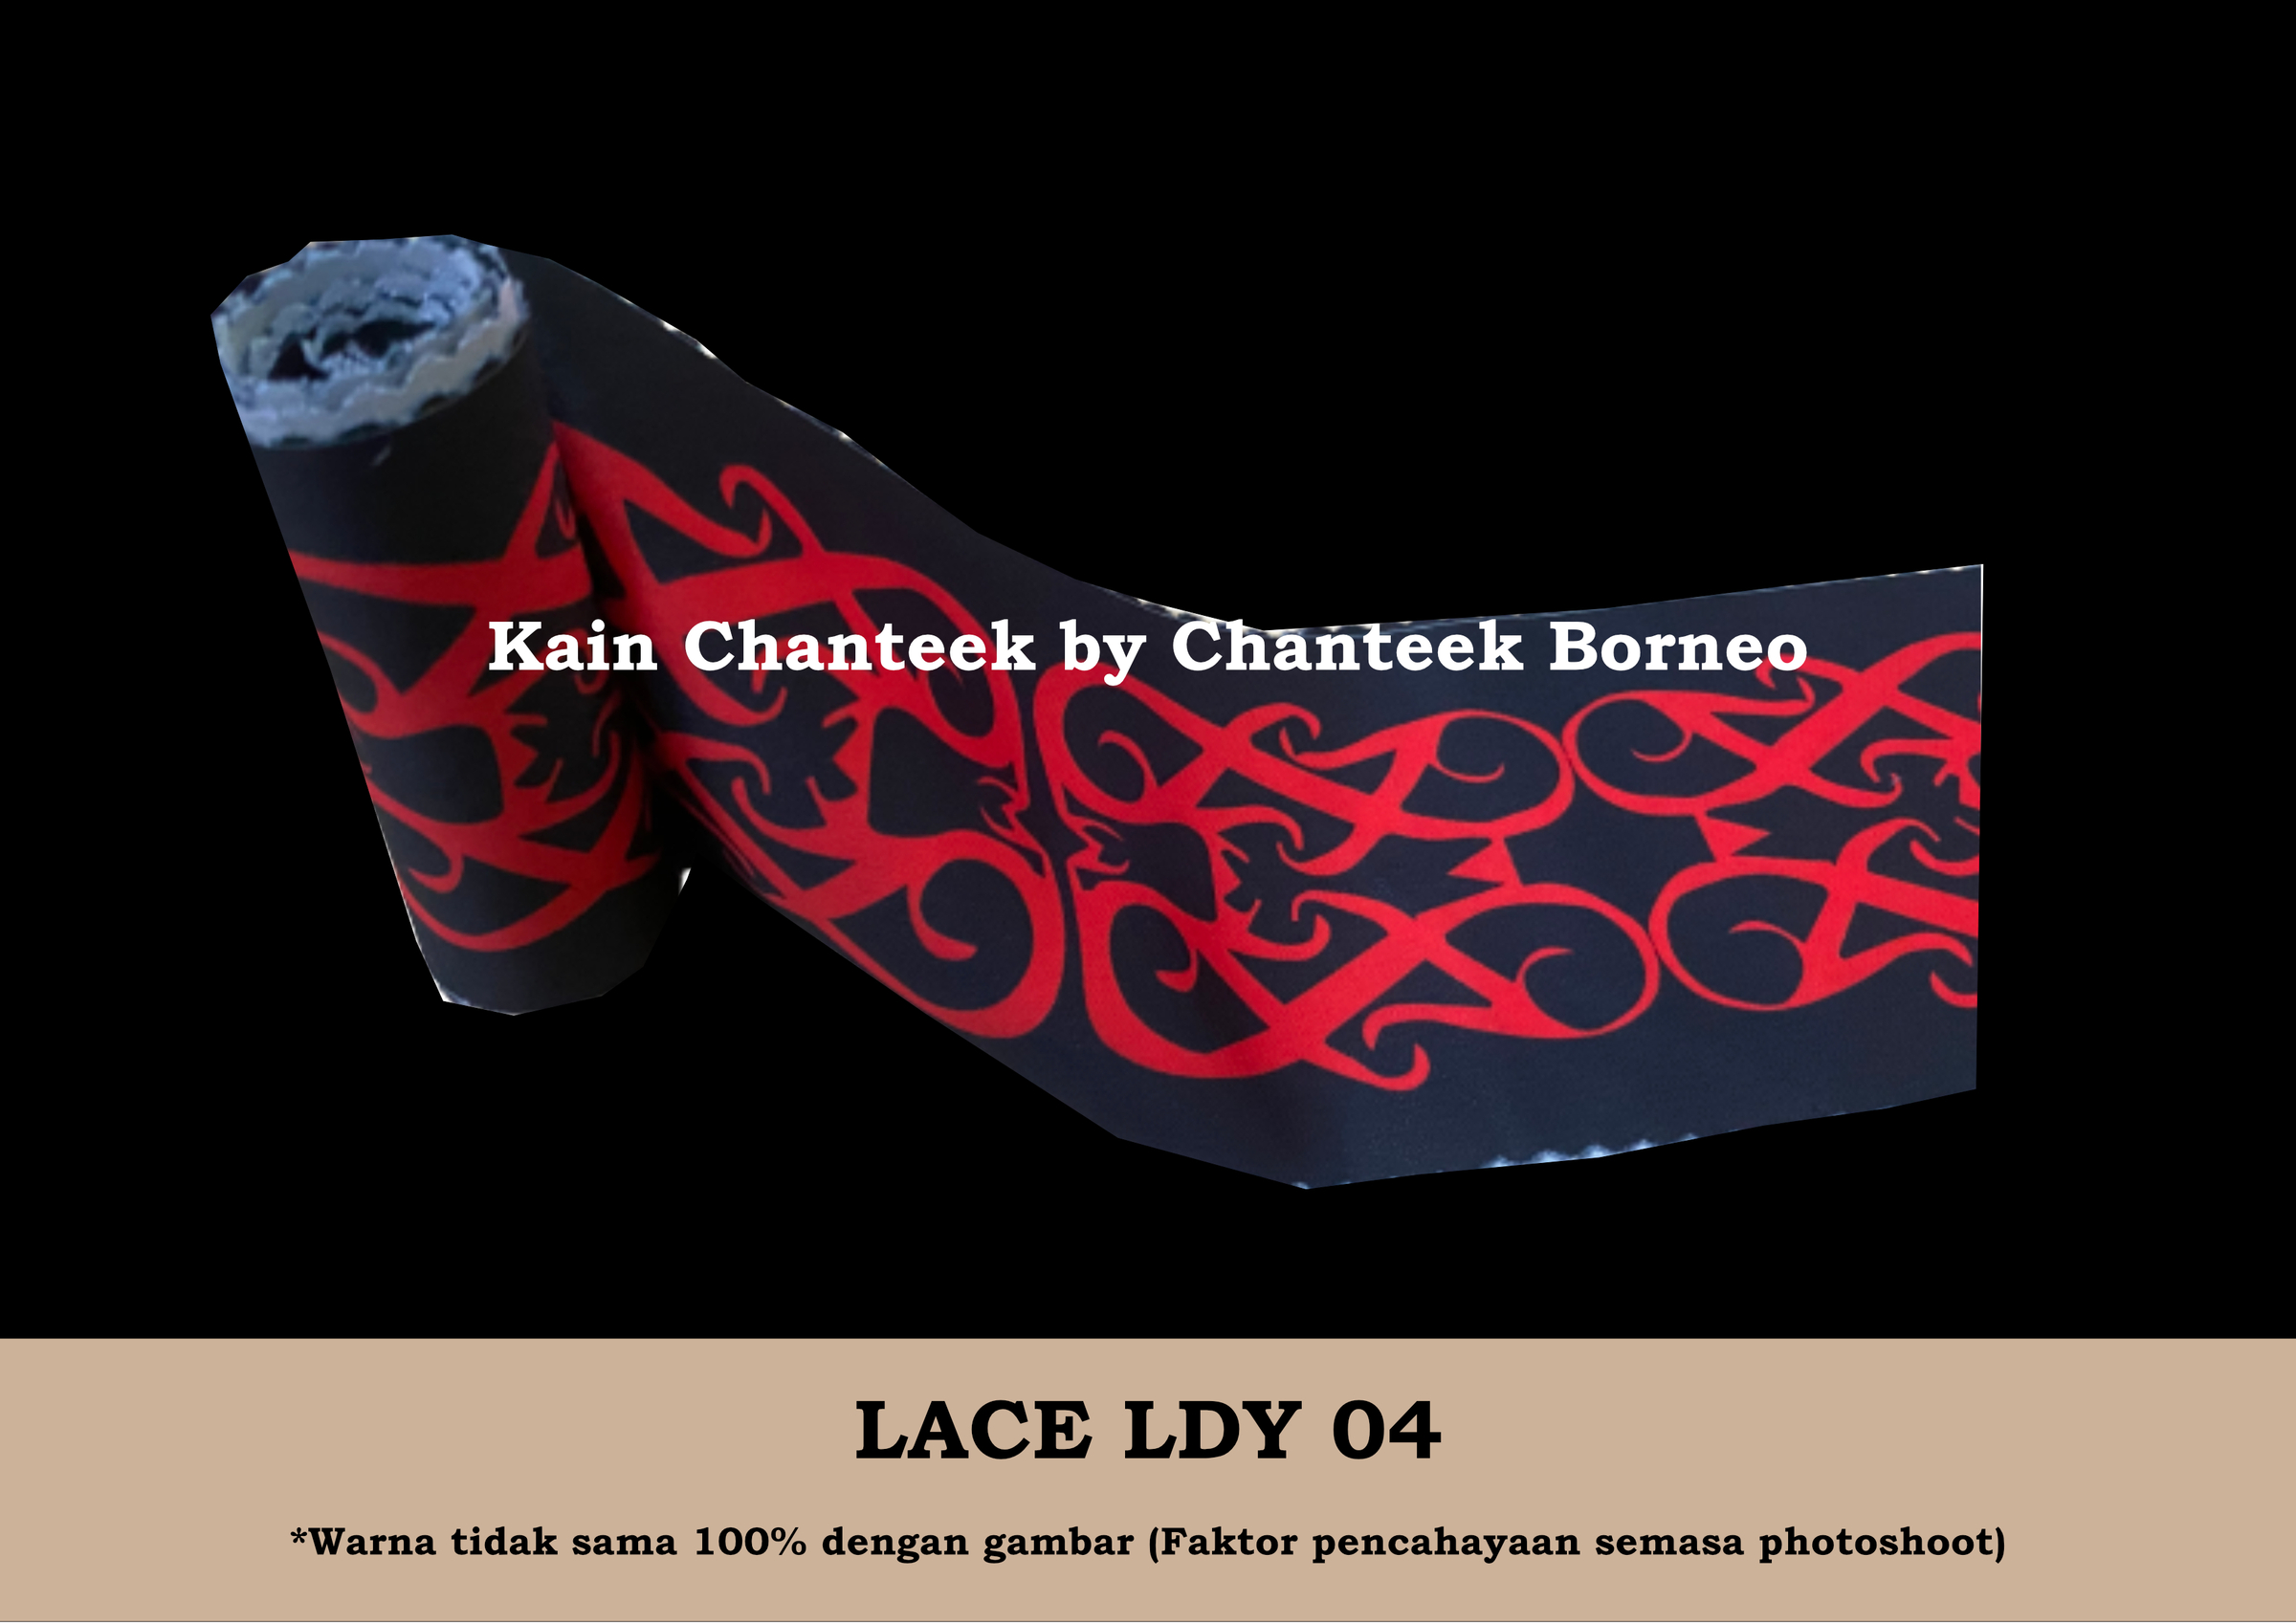 LACE LDY 04